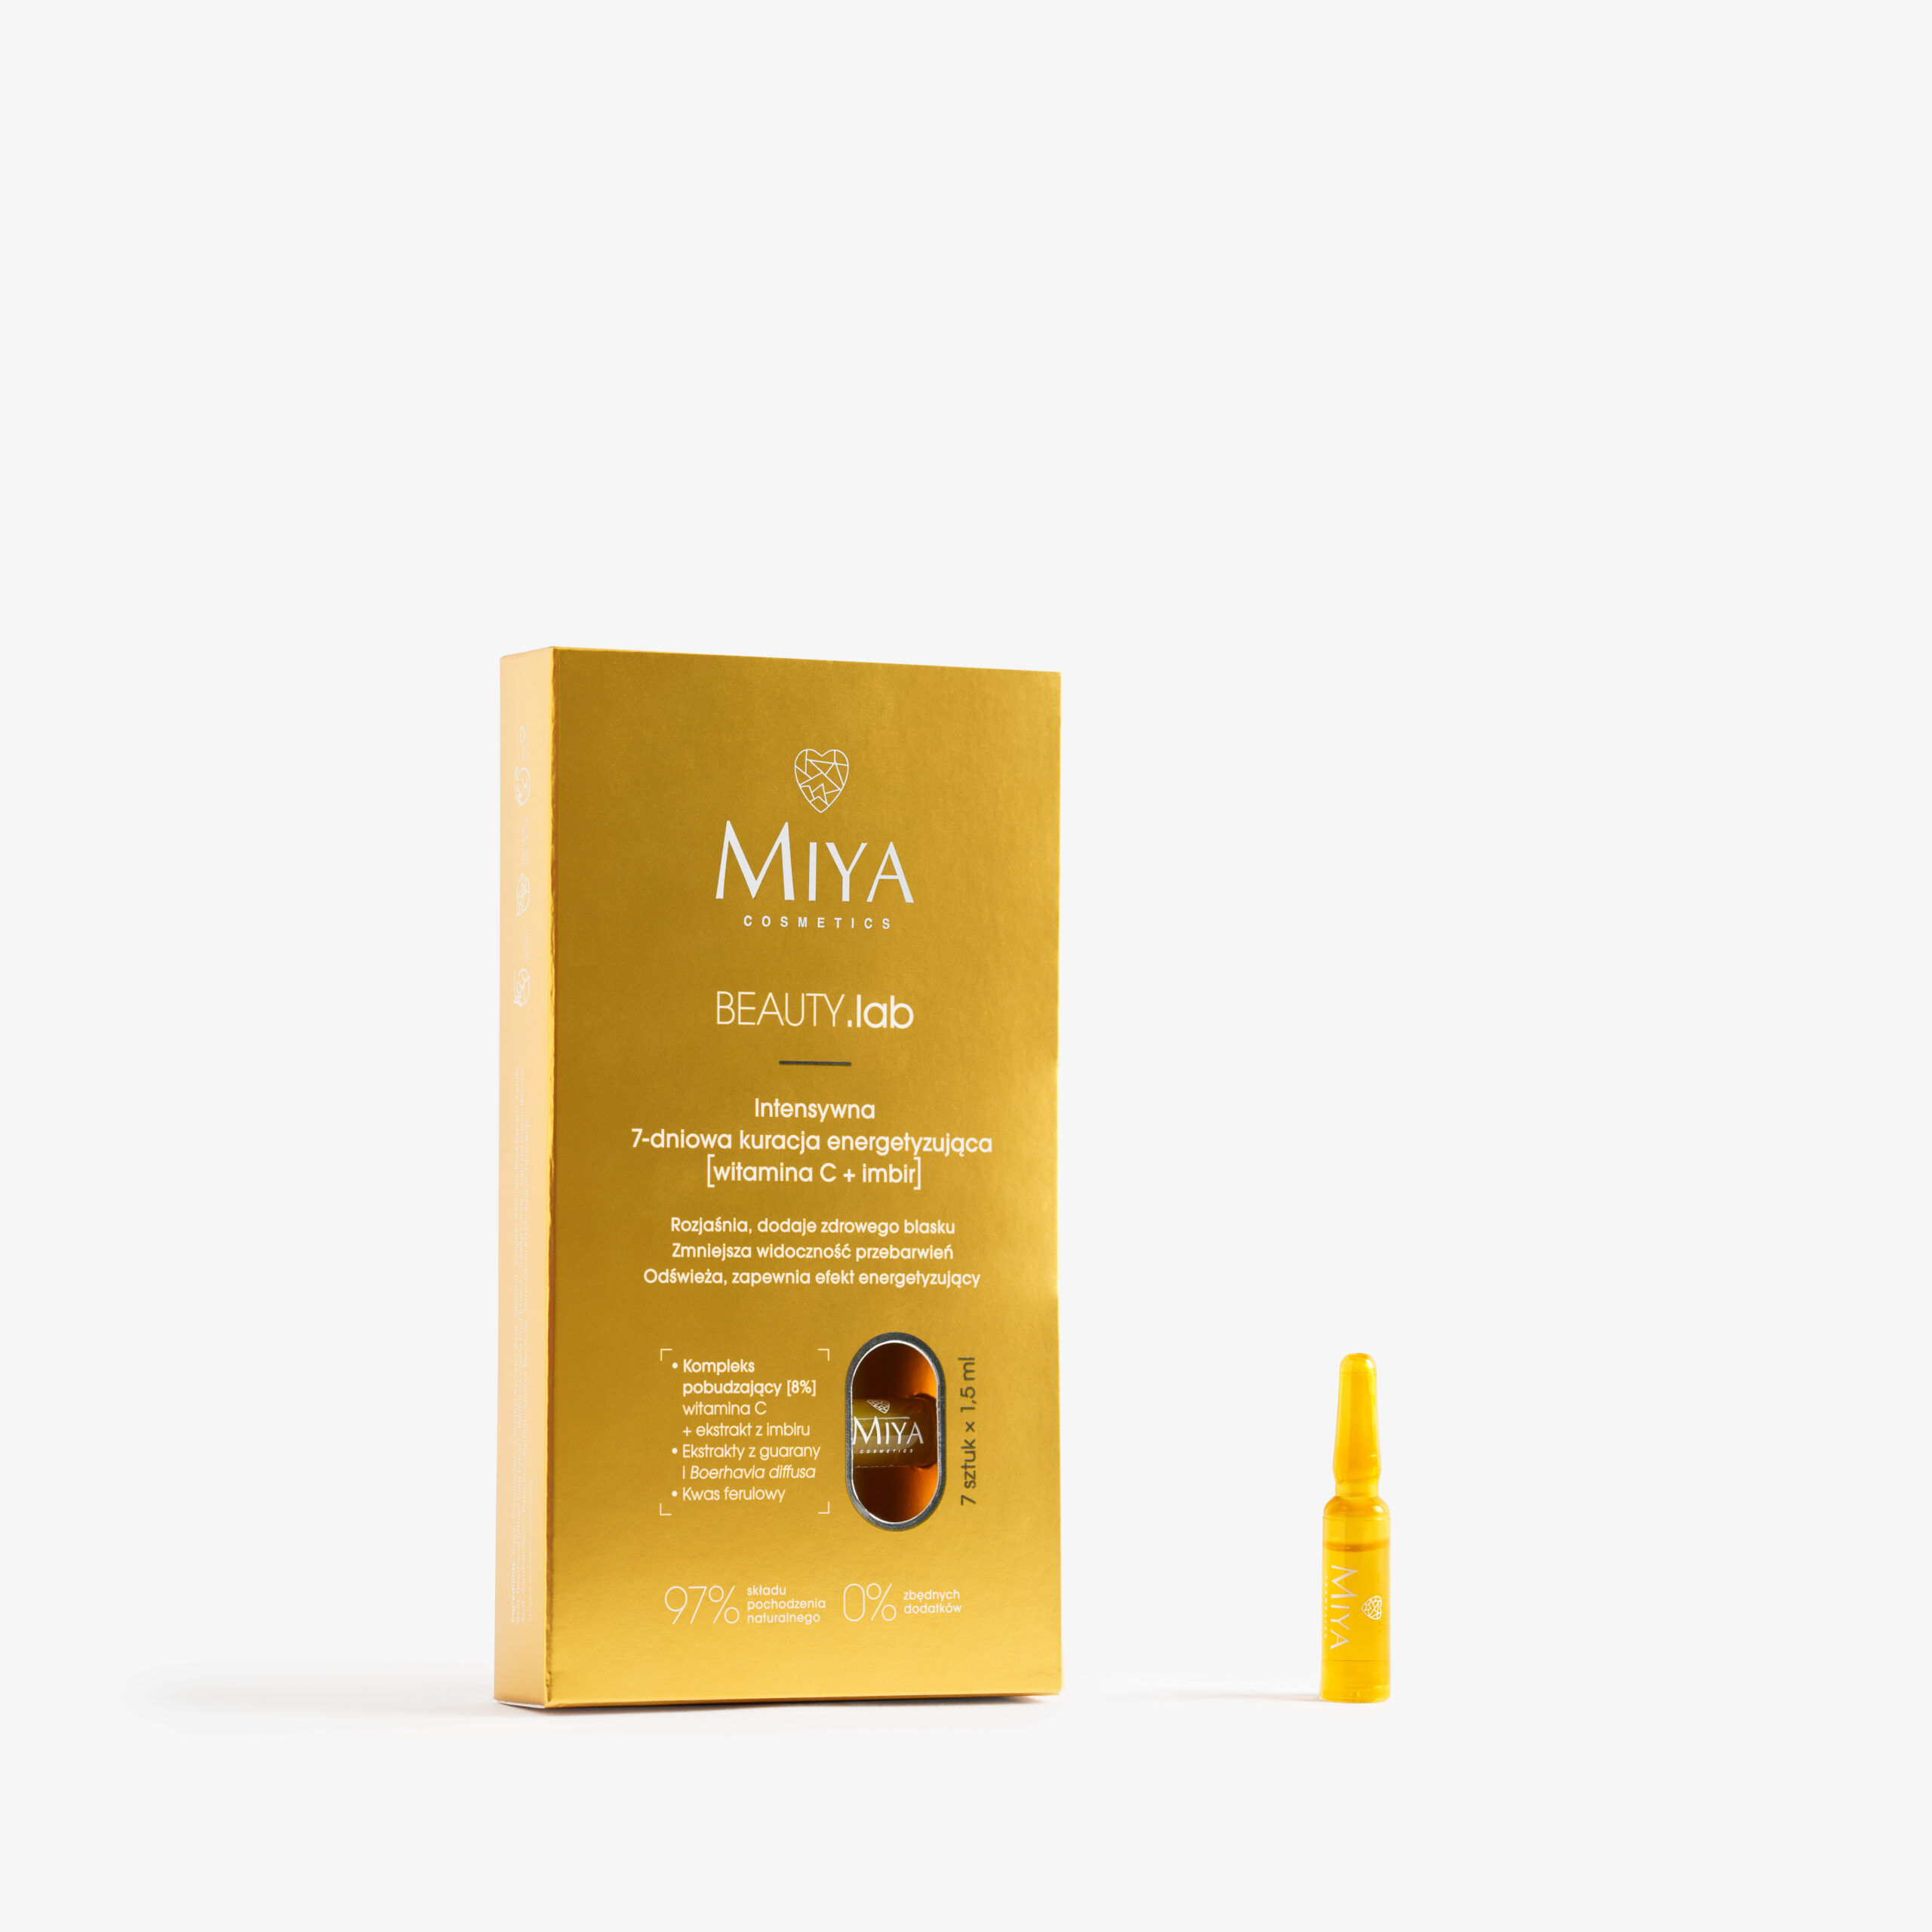 Intensive 7-day energizing treatment [vitamin C + ginger]